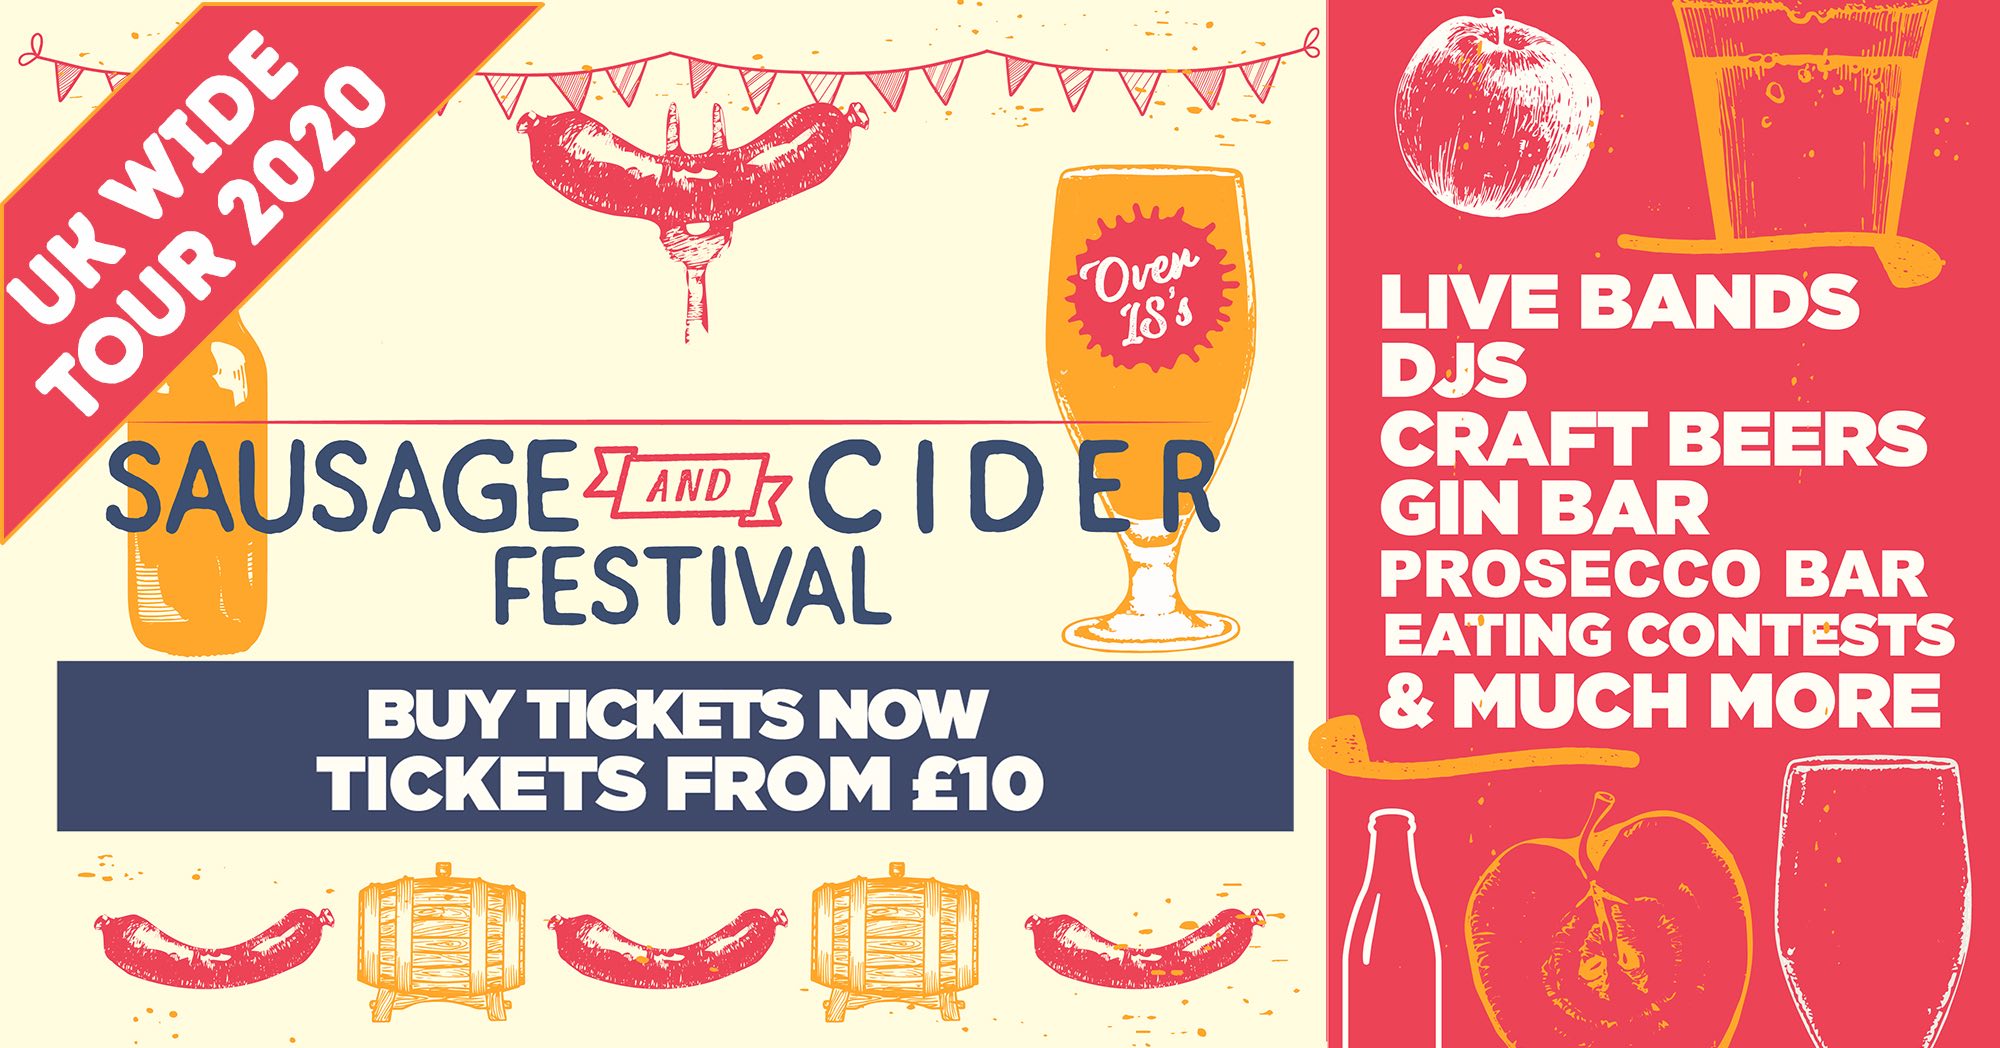 Sausage and Cider Fest Event information and Tickets